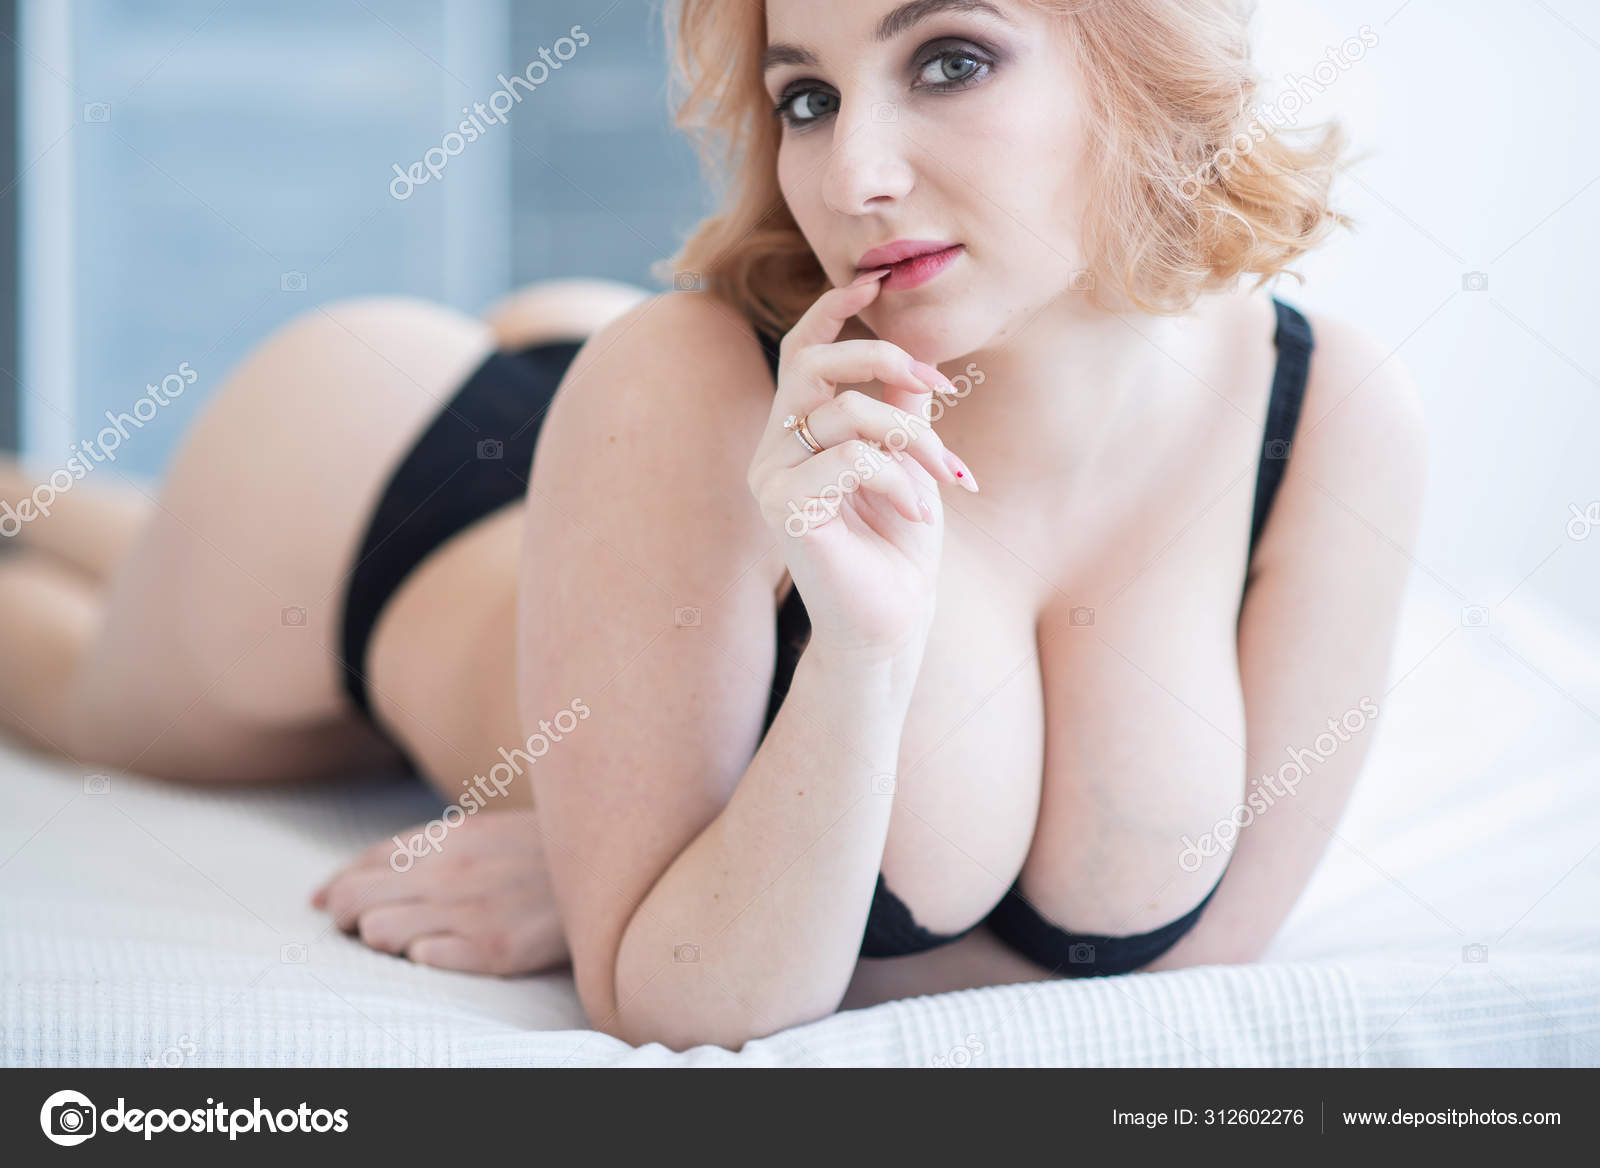 A European girl with a cute face and big Breasts in black underwear lies on her stomach picture